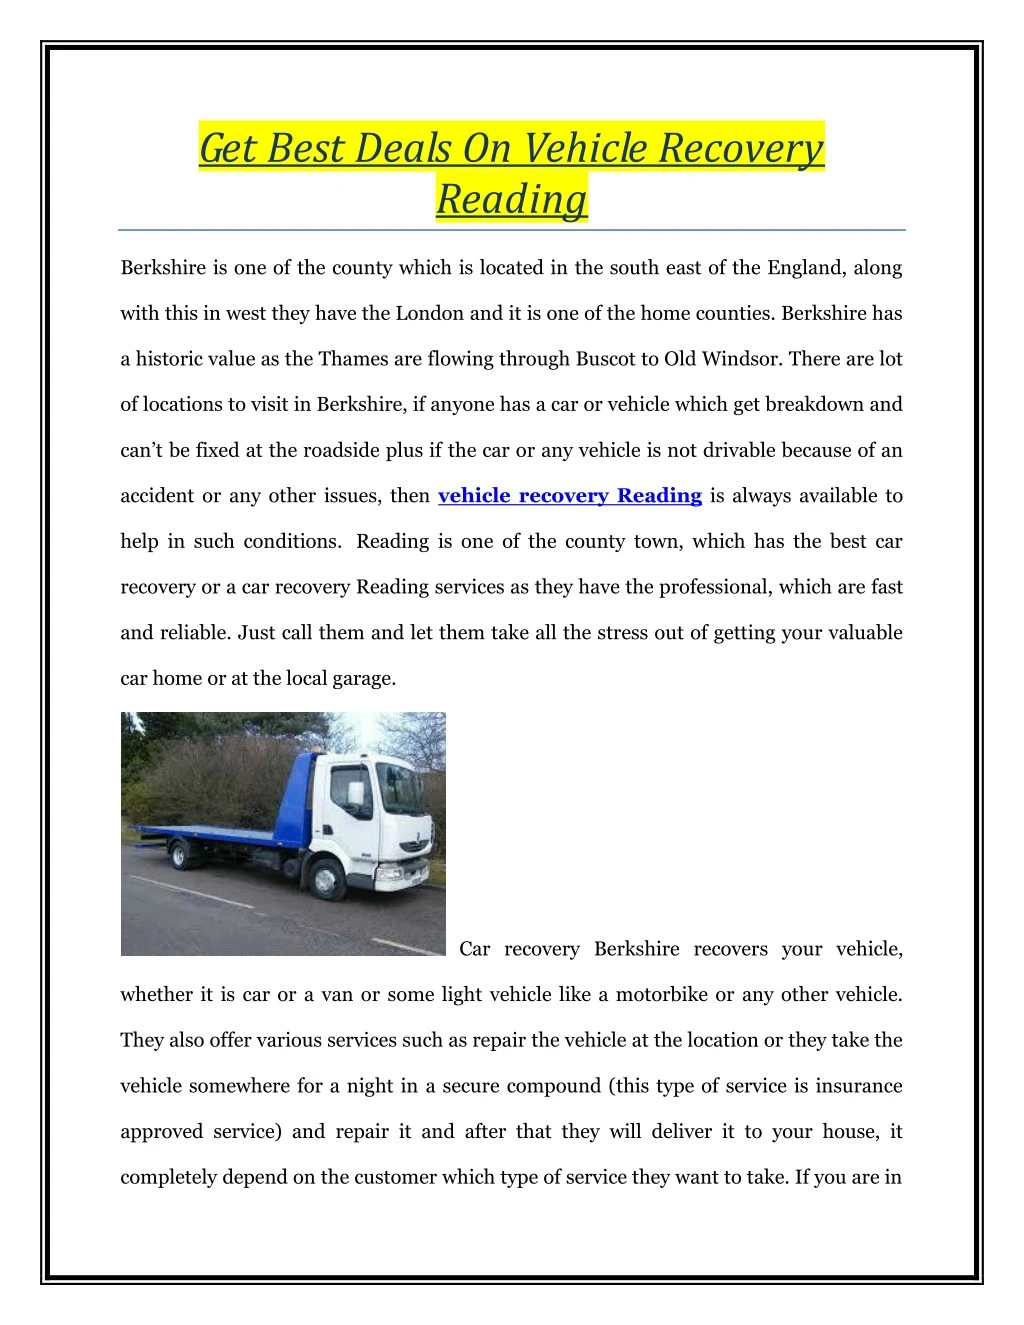 get best deals on vehicle recovery reading